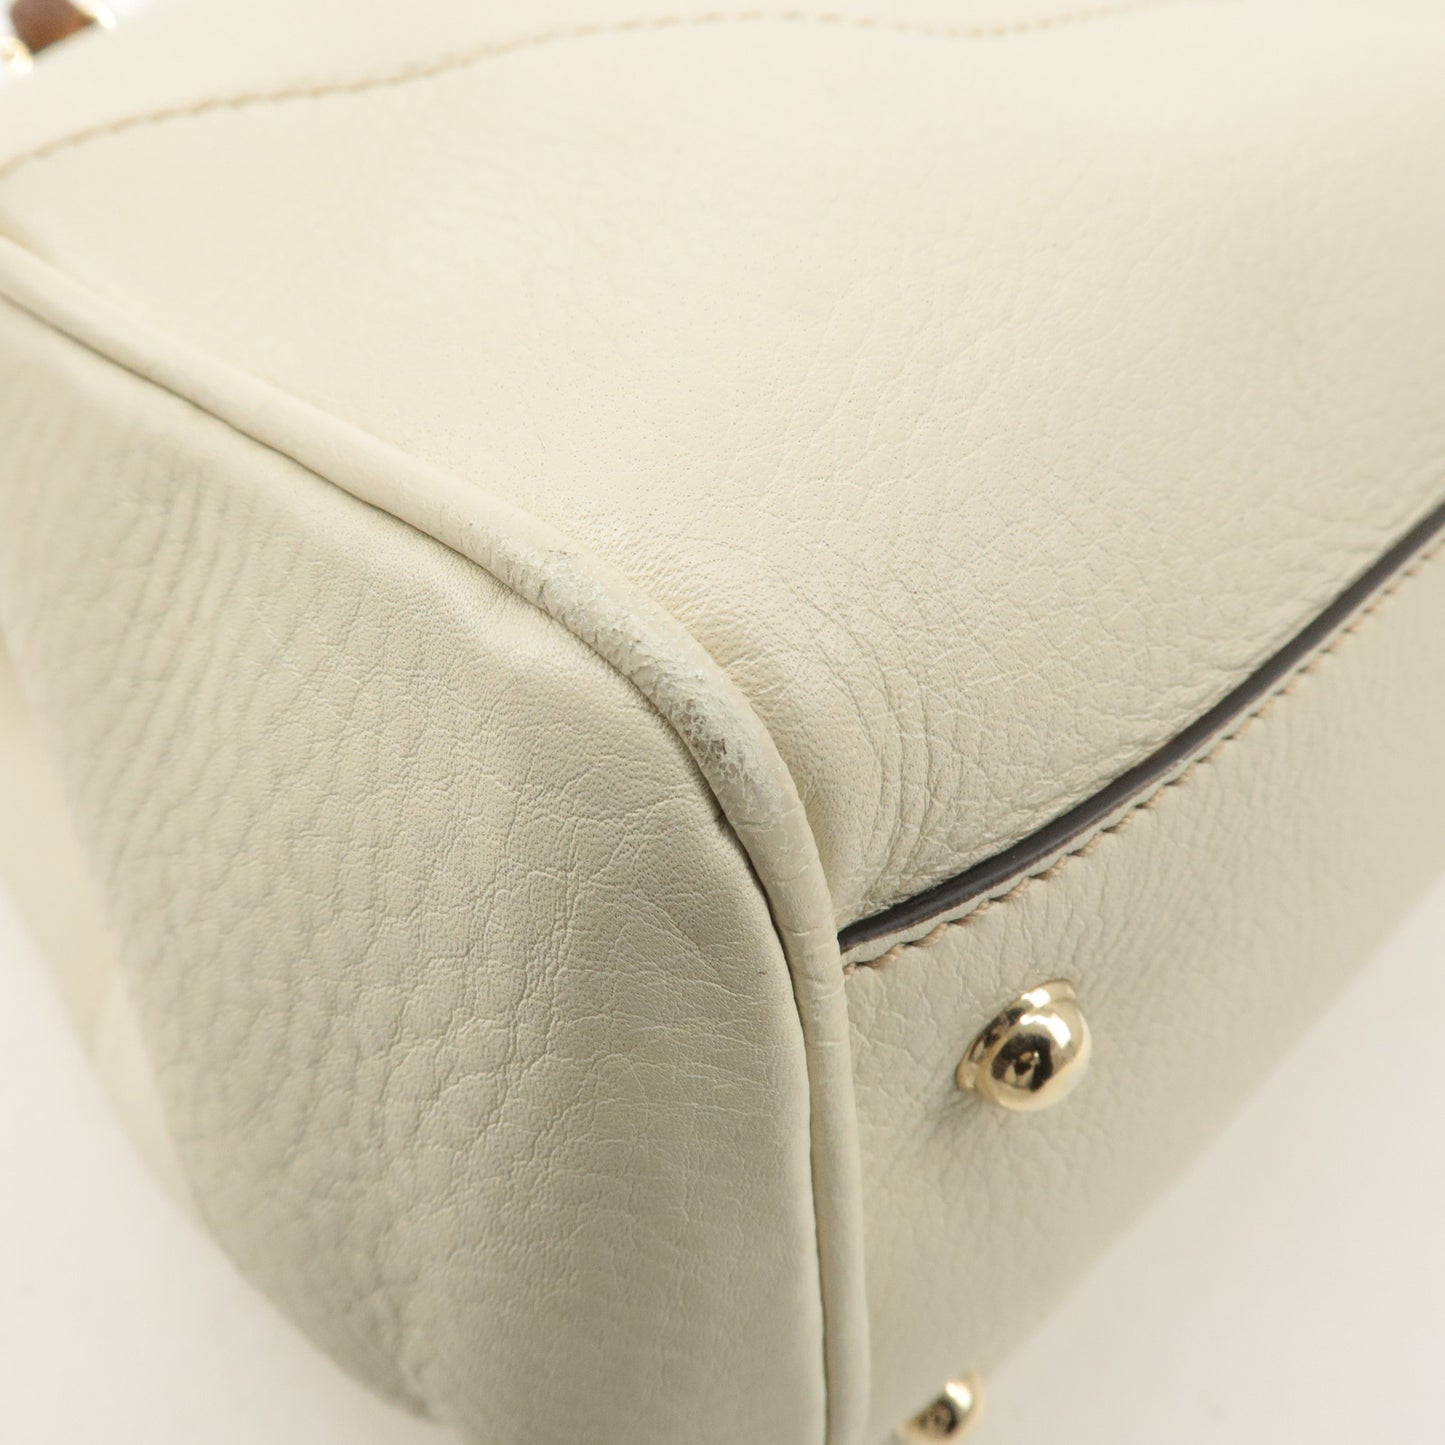 GUCCI Bamboo Leather Hand Bag Ivory 282317